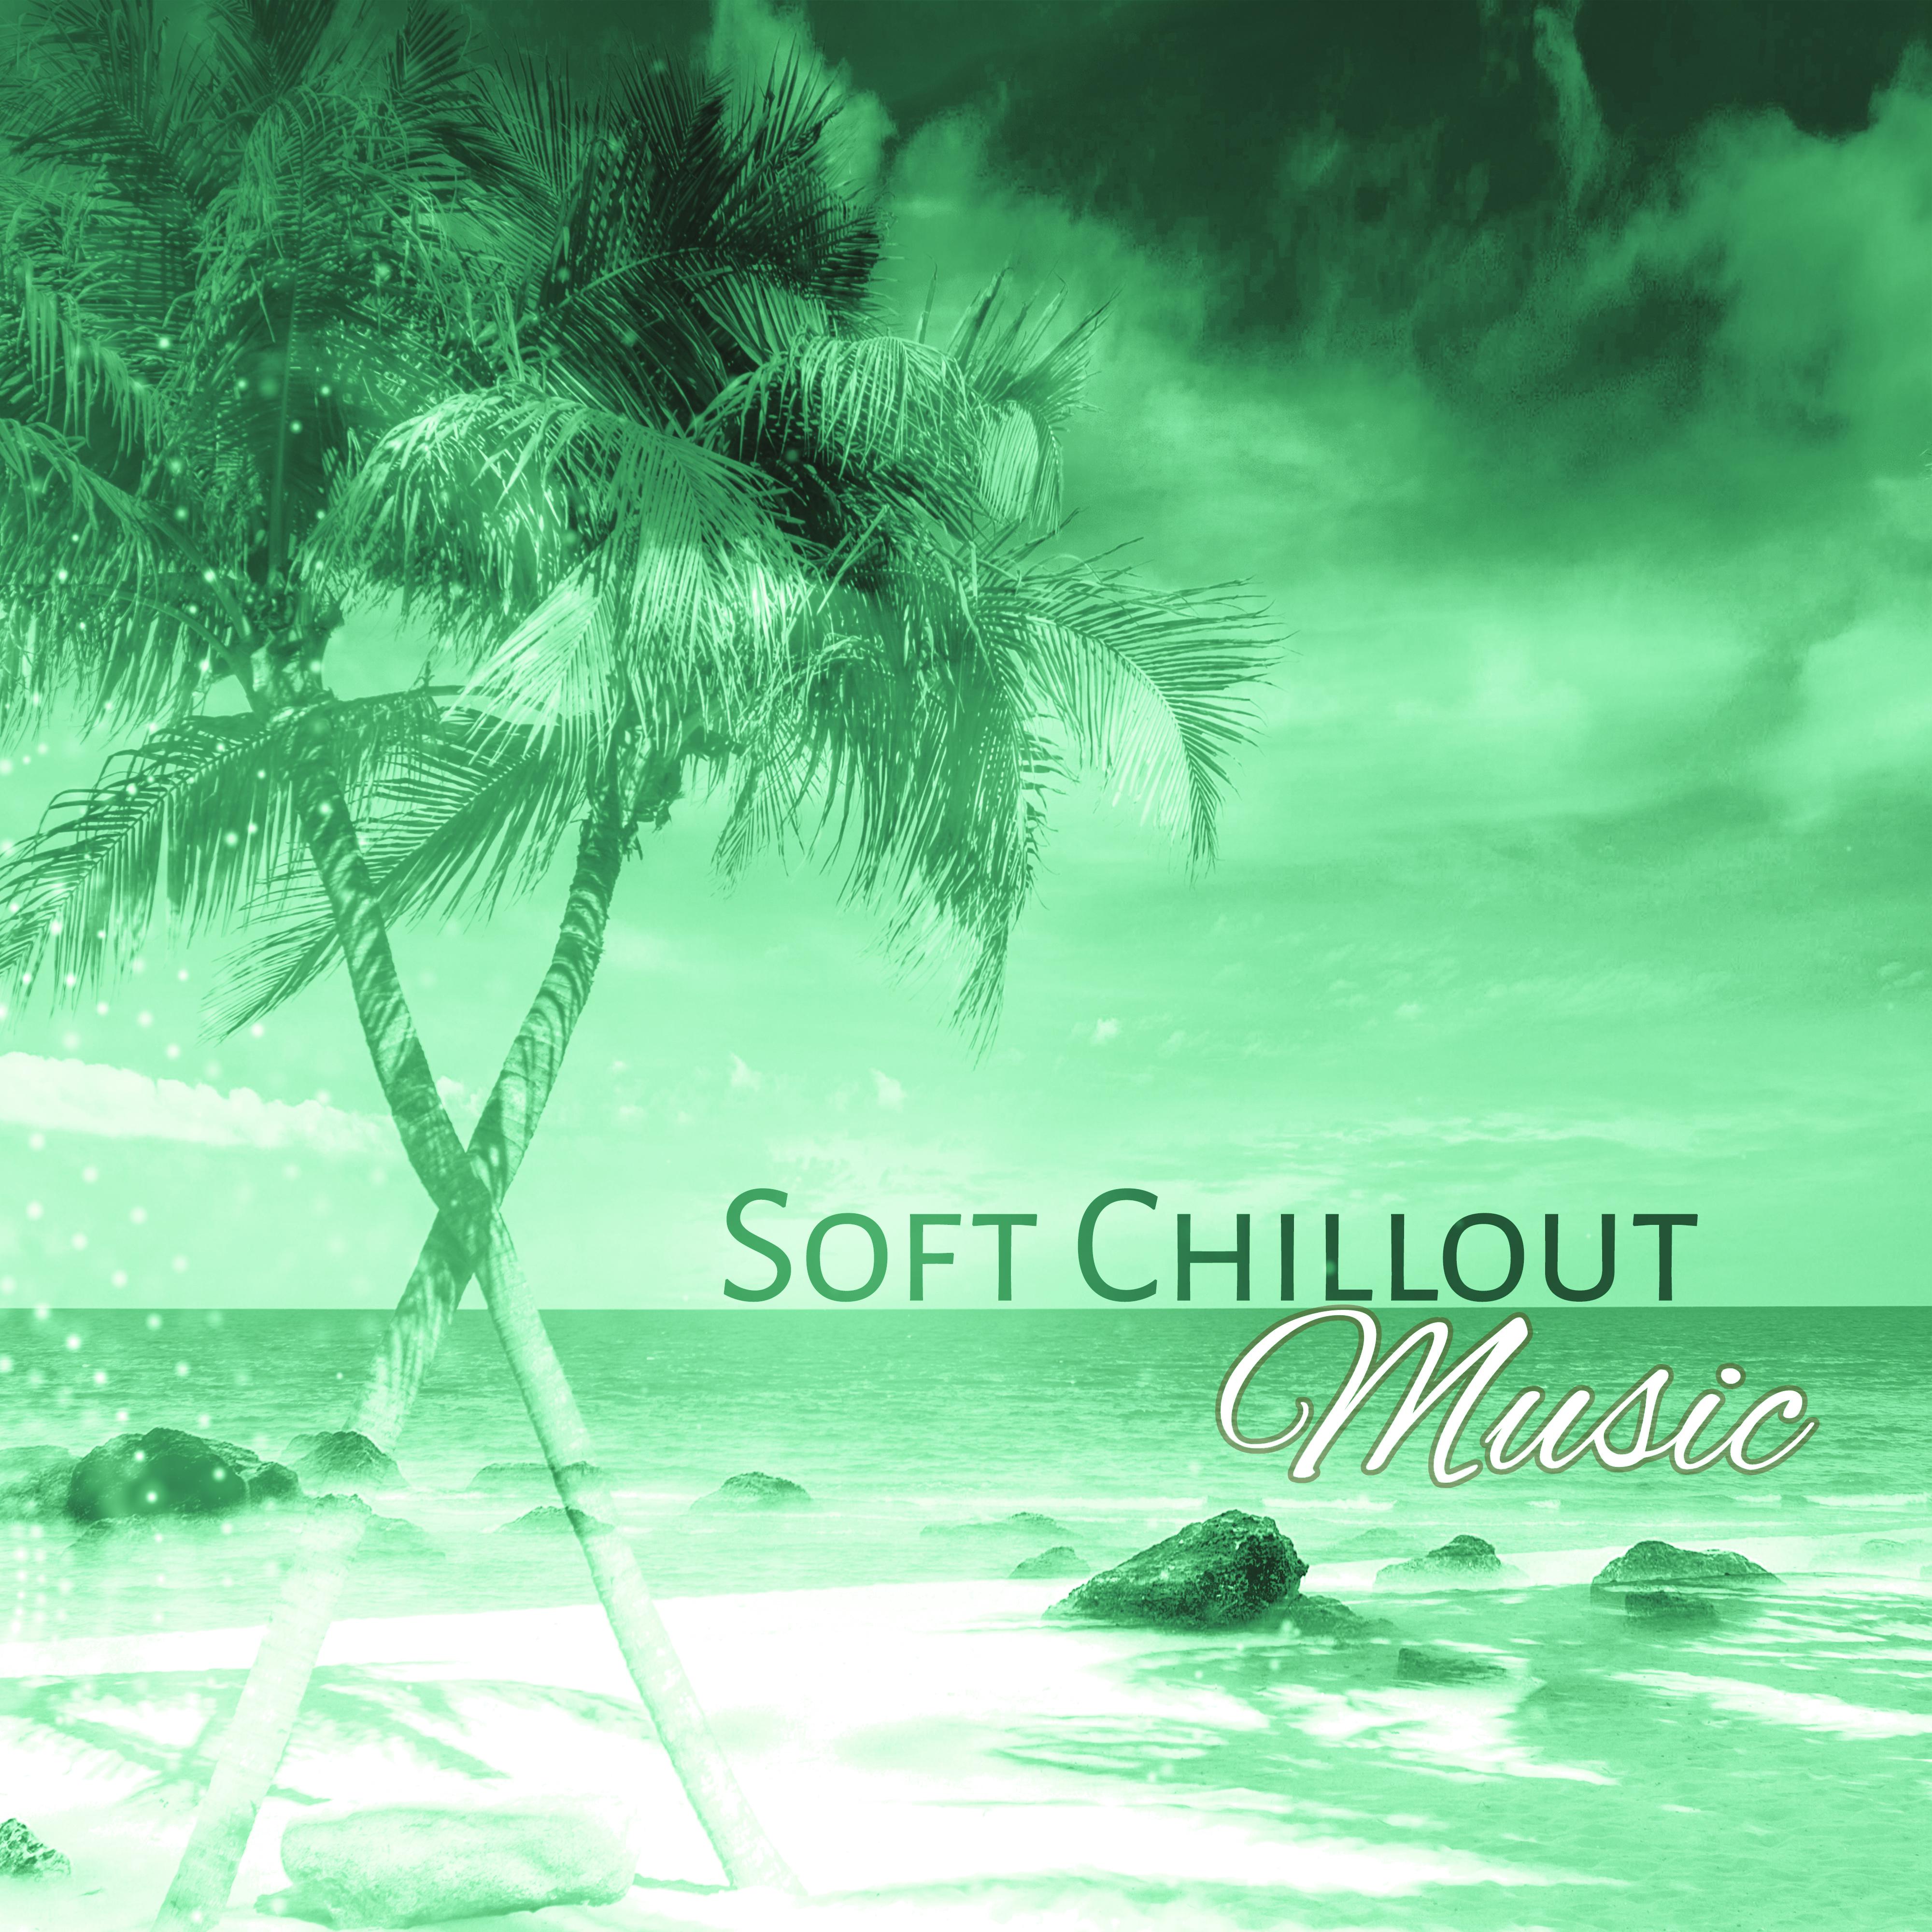 Soft Chillout Music  Gentle Sounds of Chillout, Relaxing Chill Out Music